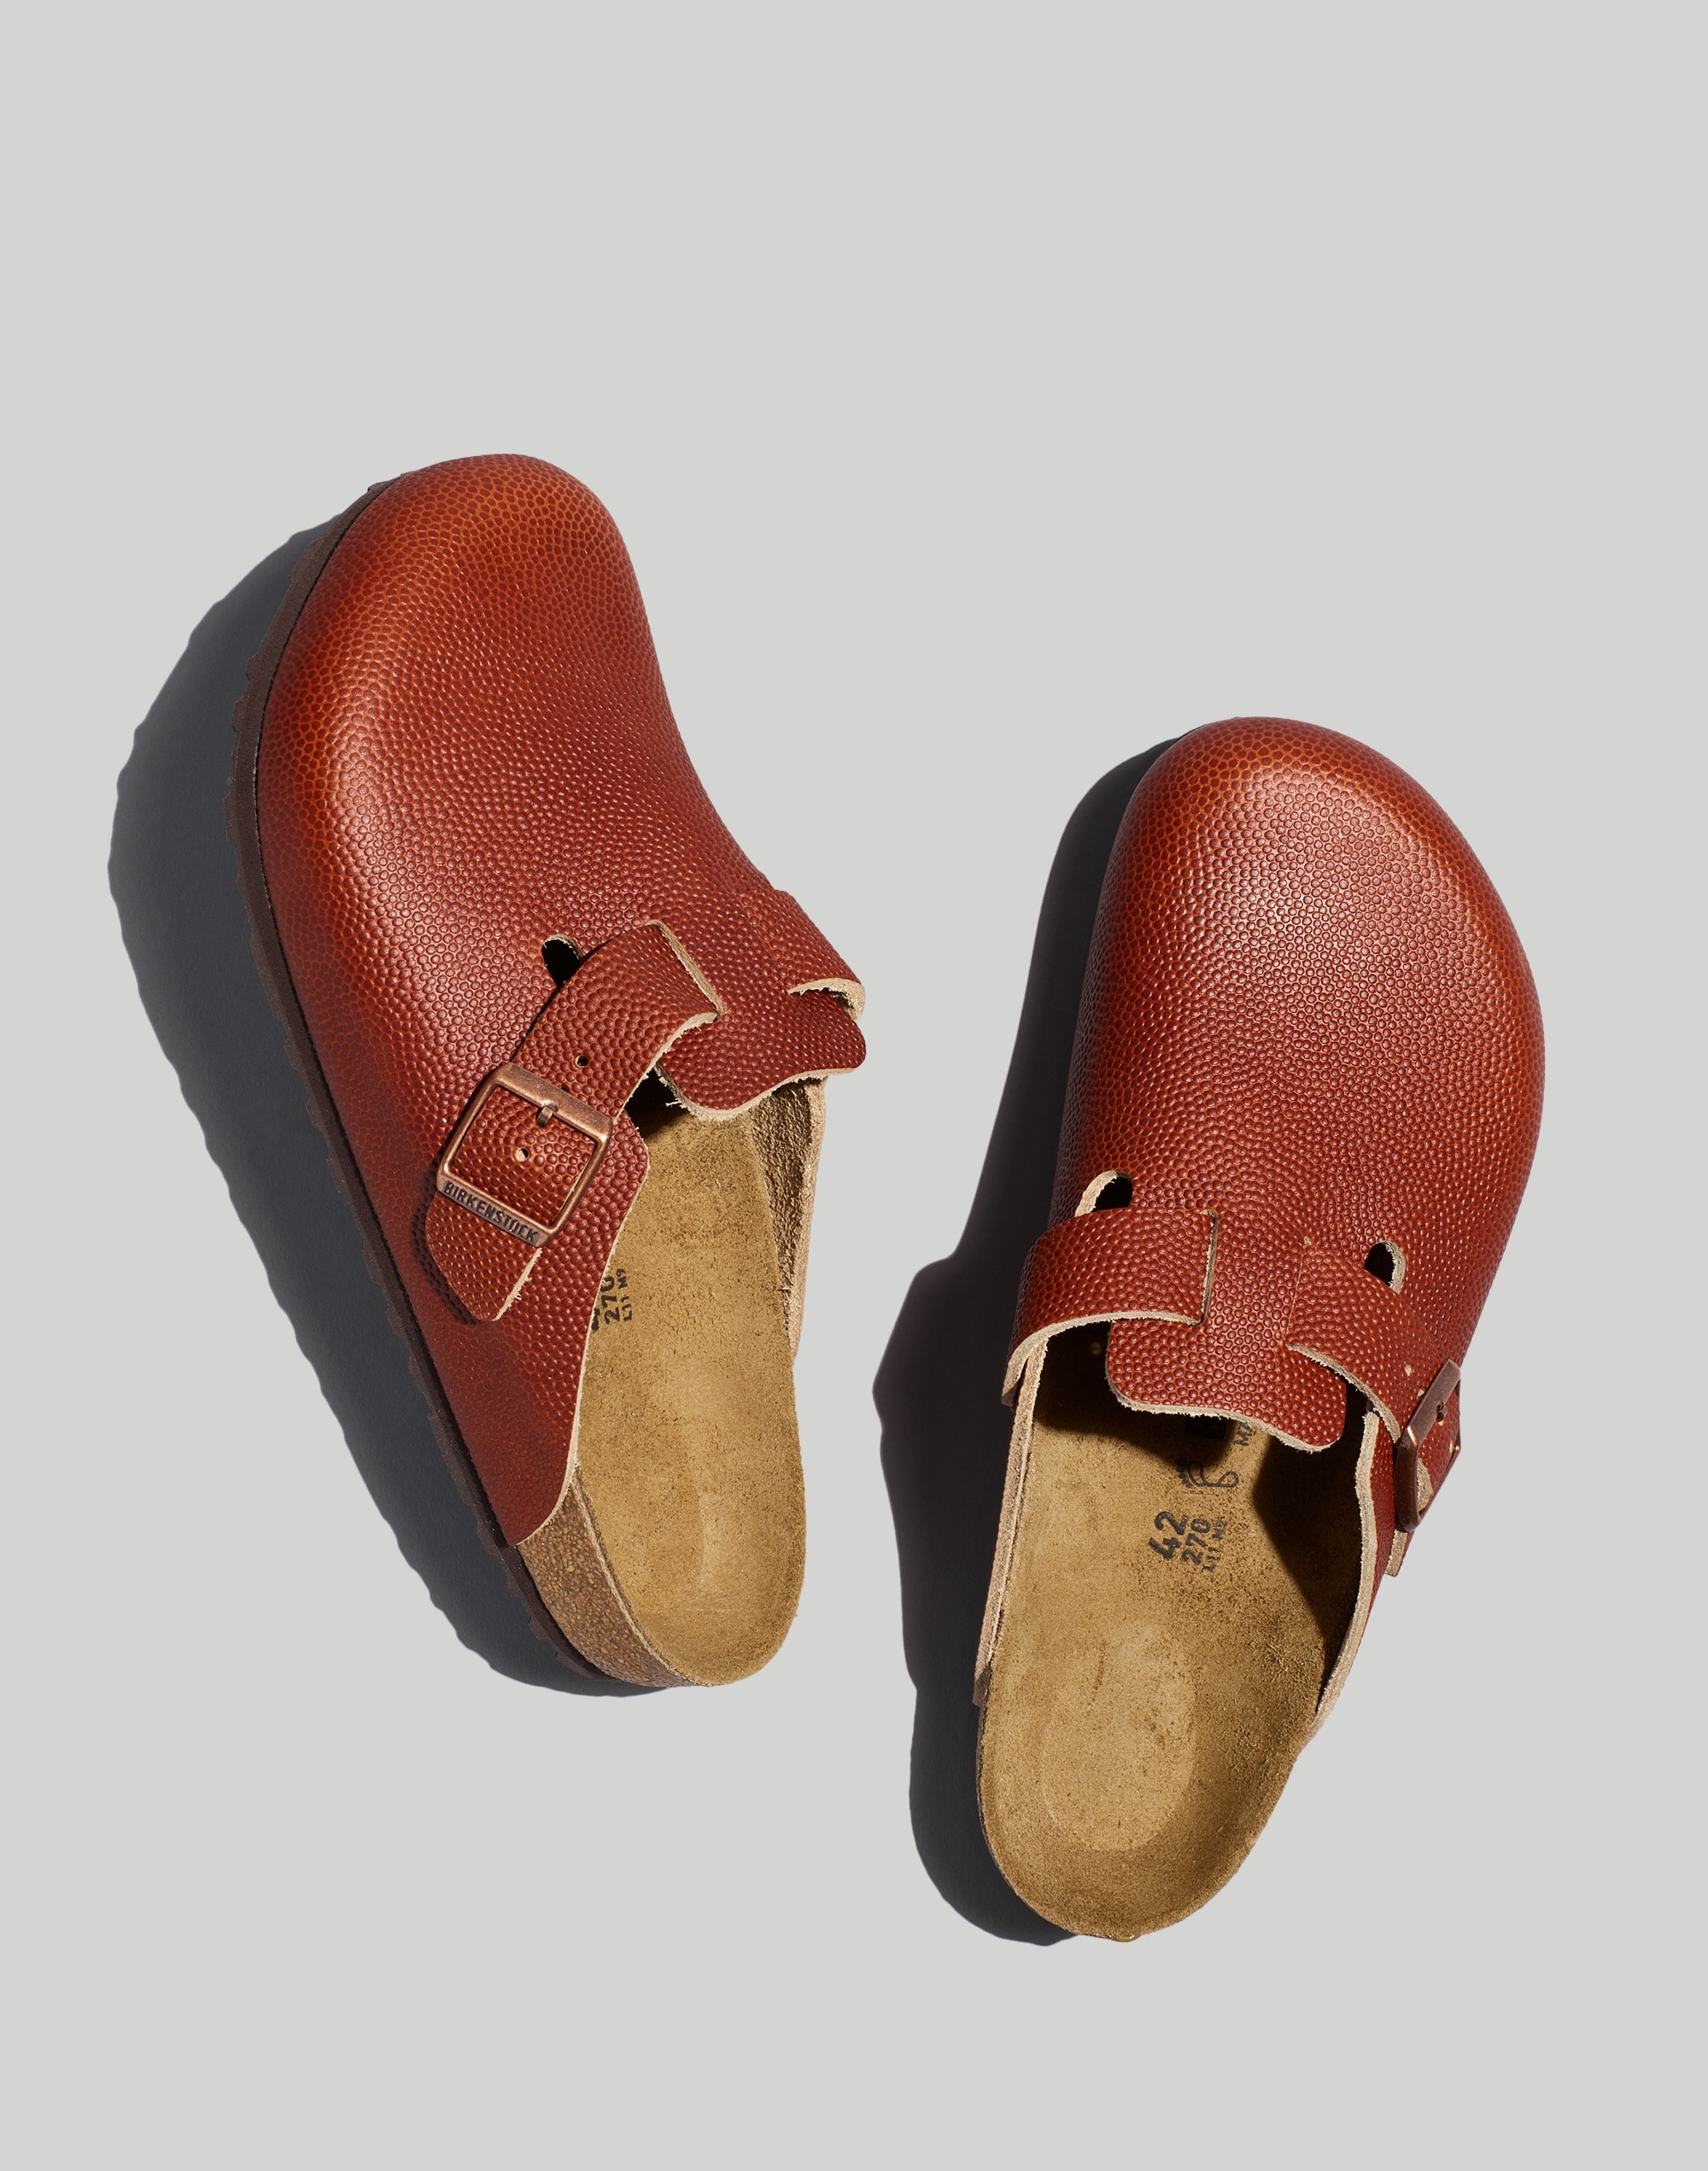 Birkenstock® Boston Textured Leather Soft Footbed Clogs